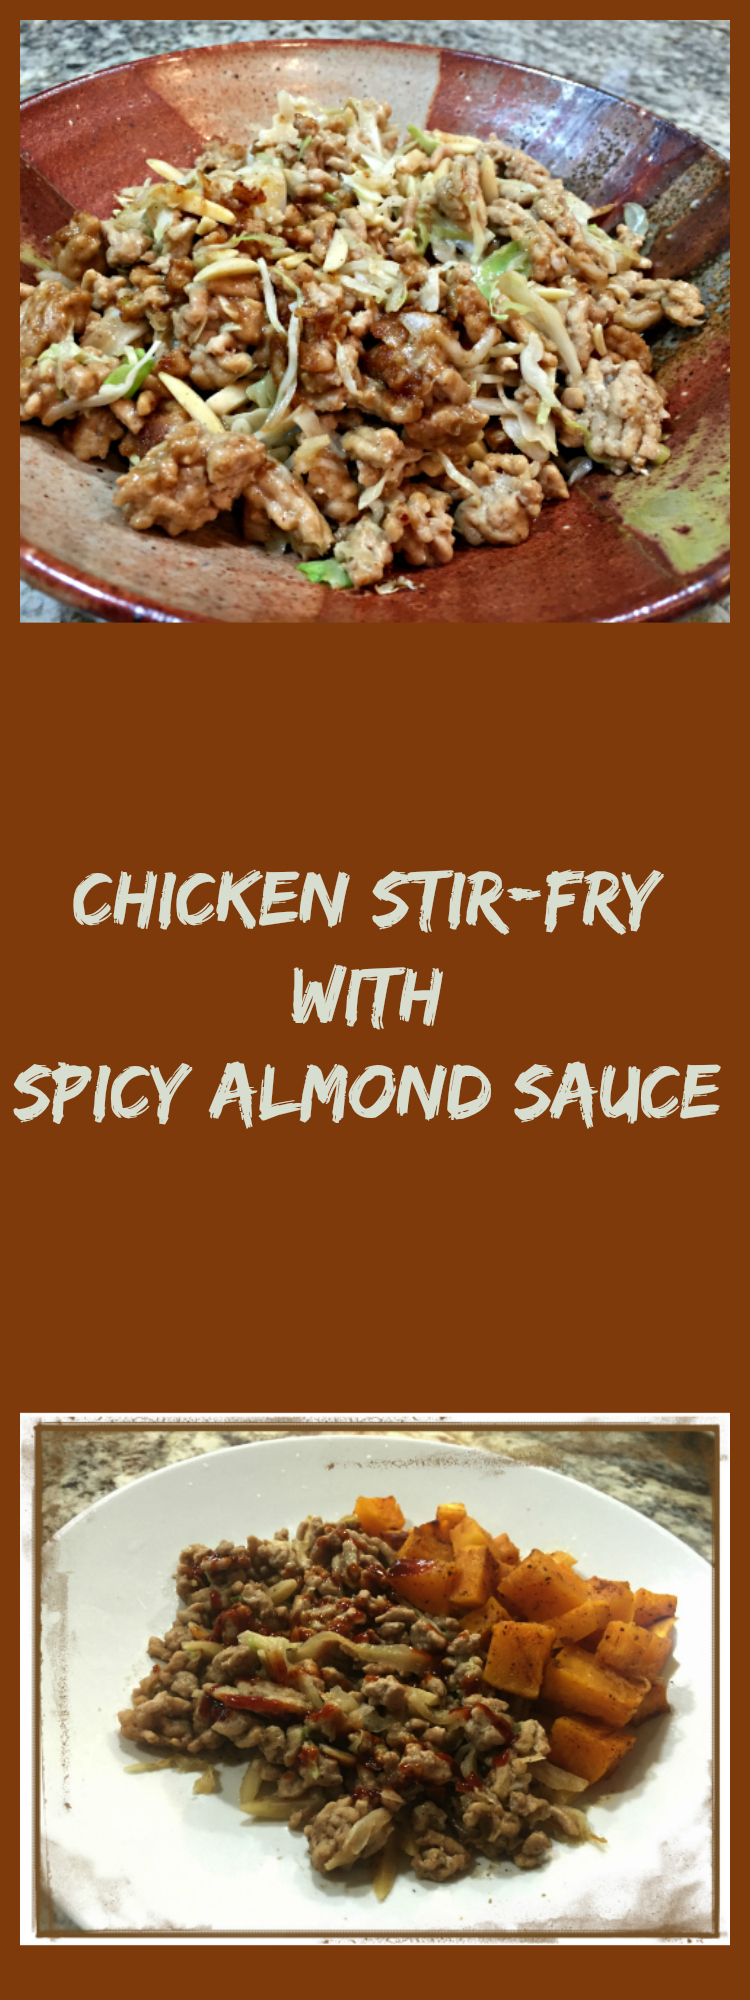 Chicken Stir-fry with Spicy Almond Sauce, from Bewitching Kitchen